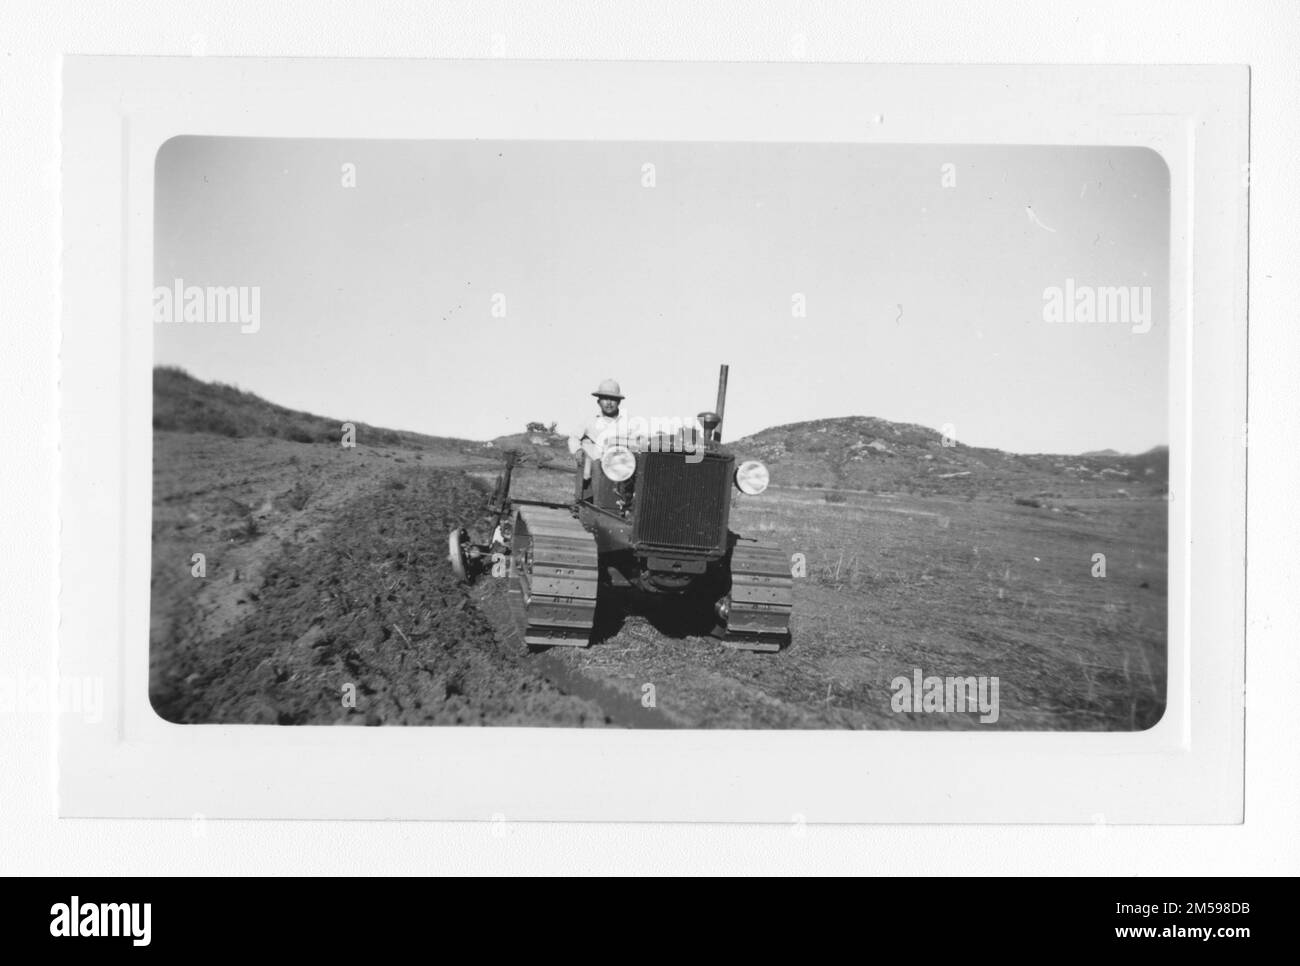 Original caption: 'New 'WM' Allis-Chalmers tractor and equipment purchased by the Barona Group of the Capitan Grande Indians'. 1936 - 1942. Pacific Region (Riverside, CA). Photographic Print. Department of the Interior. Office of Indian Affairs. Mission Agency. 11/15/1920-6/17/1946. Photographs Stock Photo